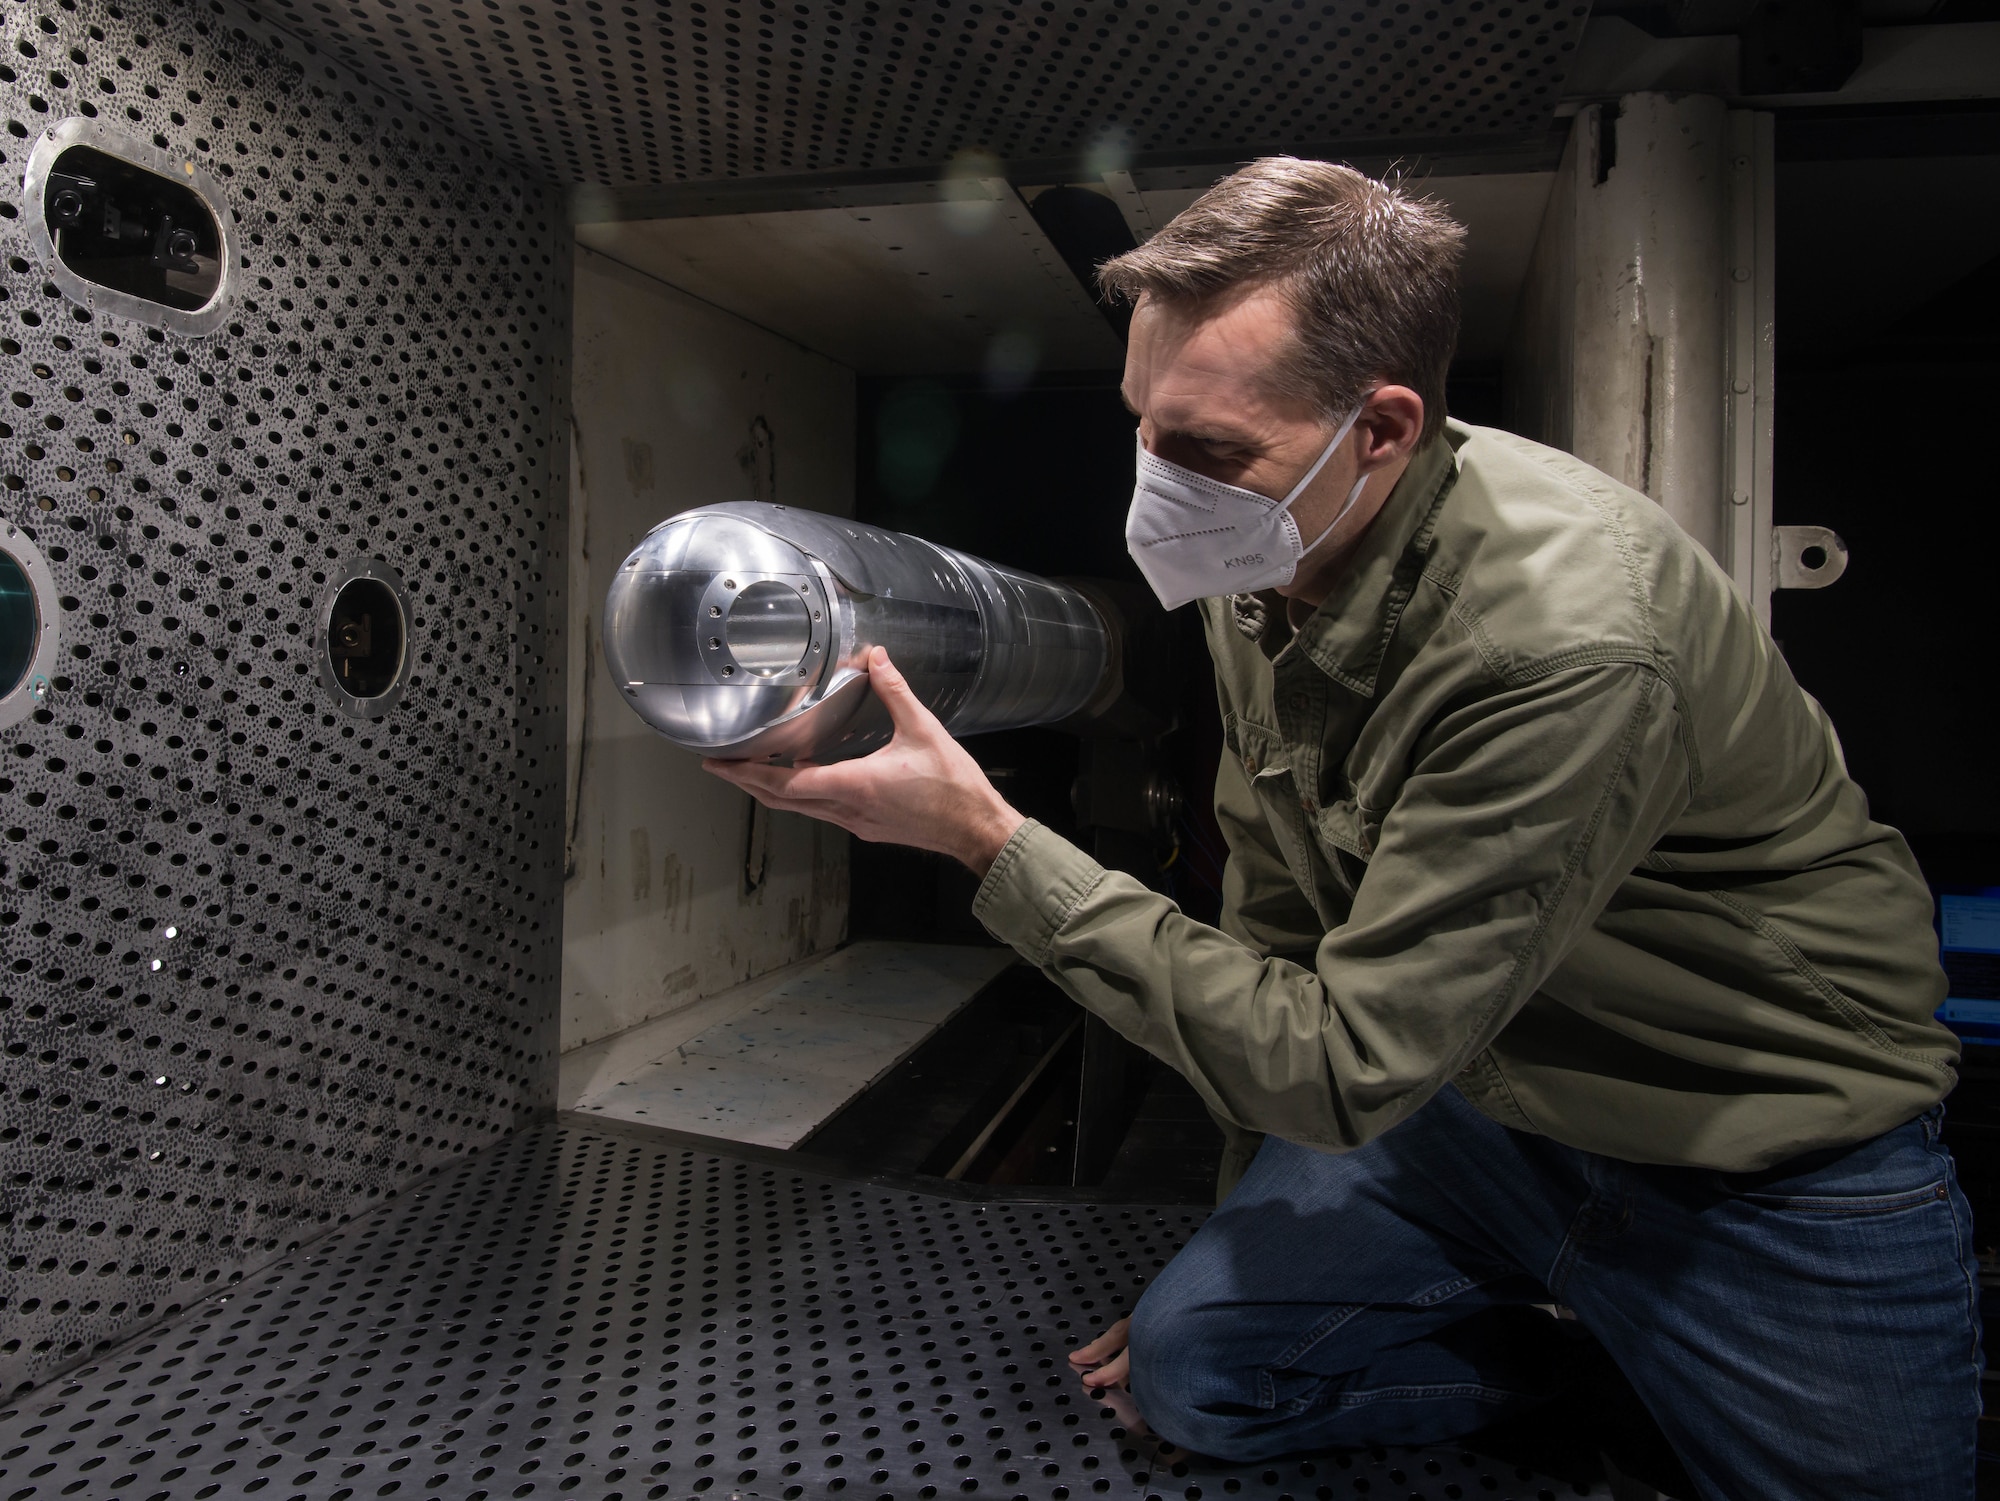 Dr. Rich Roberts, chief of the Aerodynamics Branch Store Separation Section of Arnold Engineering Development Complex, looks at a directed energy (DE) system turret positioned on a sting in the 4-foot transonic wind tunnel at Arnold Air Force Base, Tenn., March 5, 2021. The branch plans to expand DE wind tunnel testing capabilities later this year with the addition of the Integrated Directed Energy Aero-Optical Surrogate, which is a subscale model of an F-15 aircraft with the ability to test laser pods. (U.S. Air Force photo by Jill Pickett)